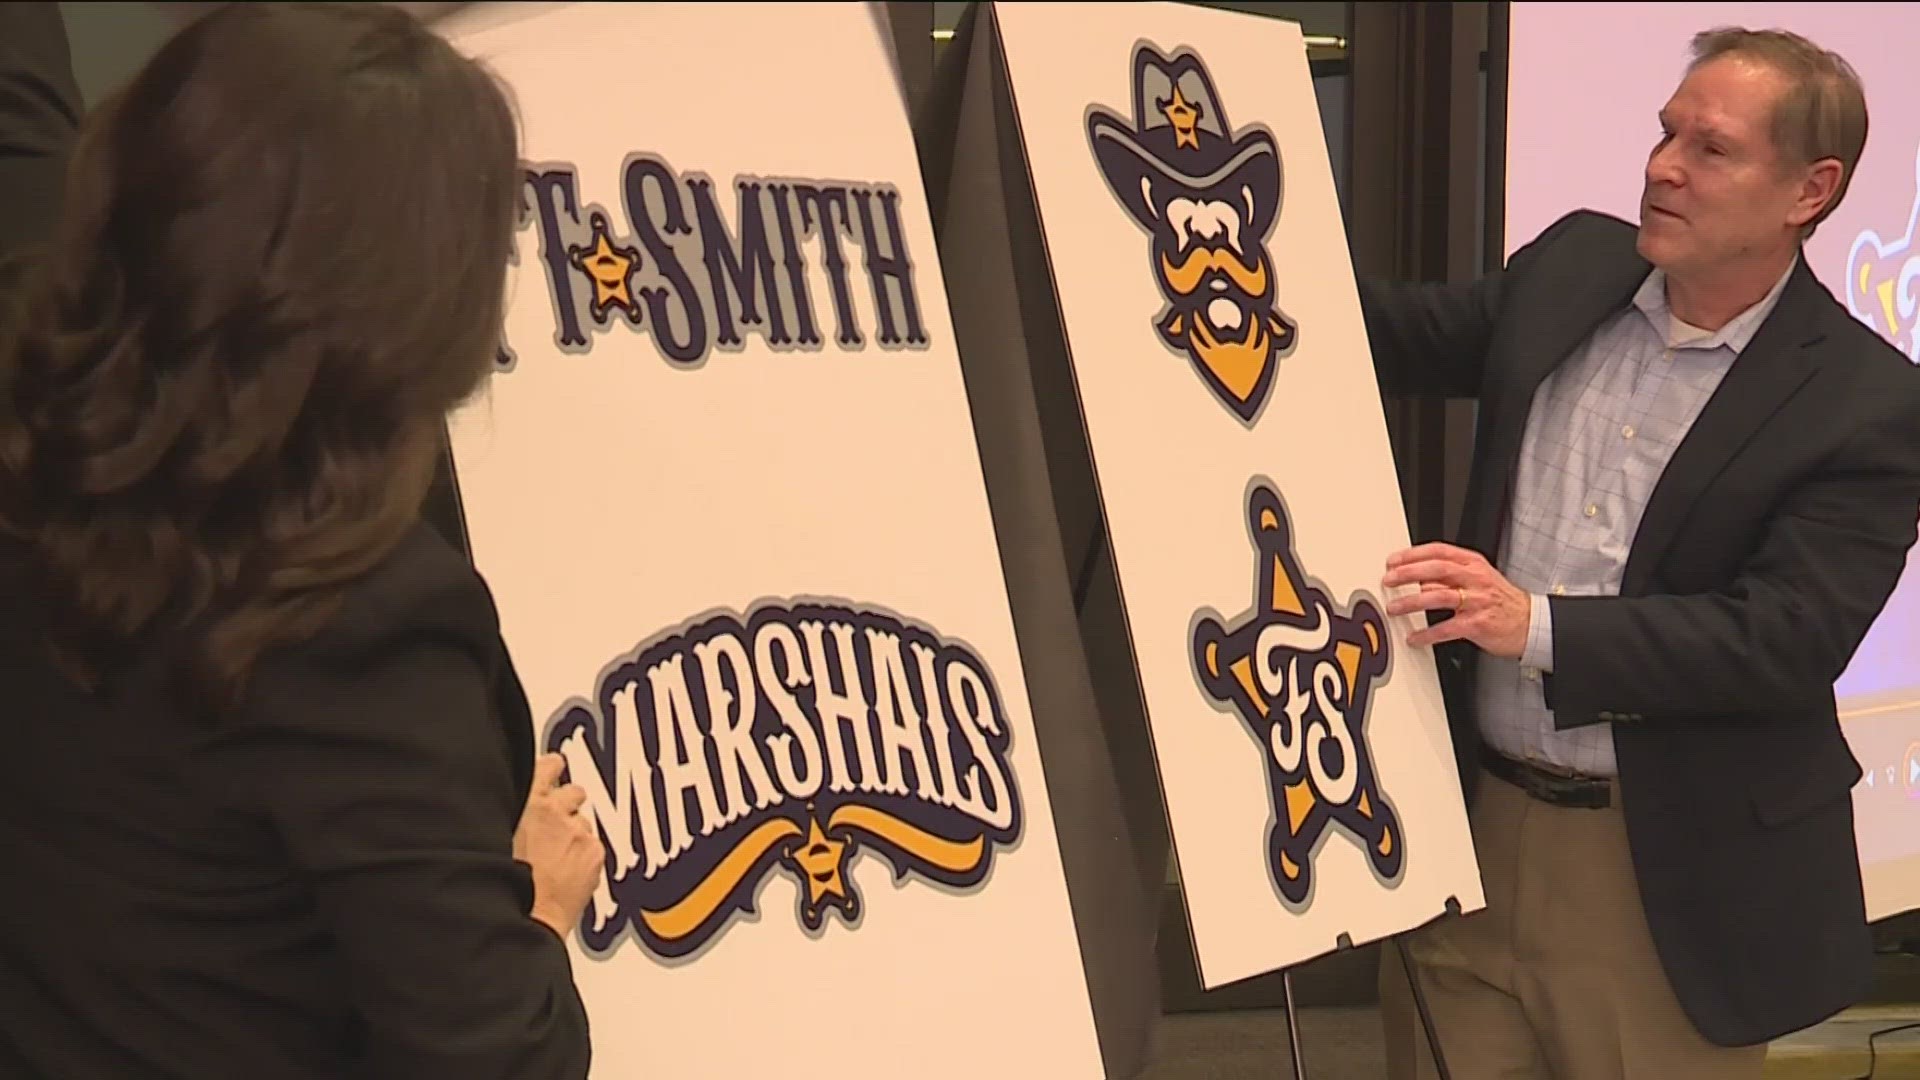 THE WAIT IS OVER, WE NOW KNOW WHAT THE NEW MID-AMERICA LEAGUE BASEBALL TEAM WILL BE CALLED IN FORT SMITH WHEN IT STARTS PLAYING THERE THIS SPRING.